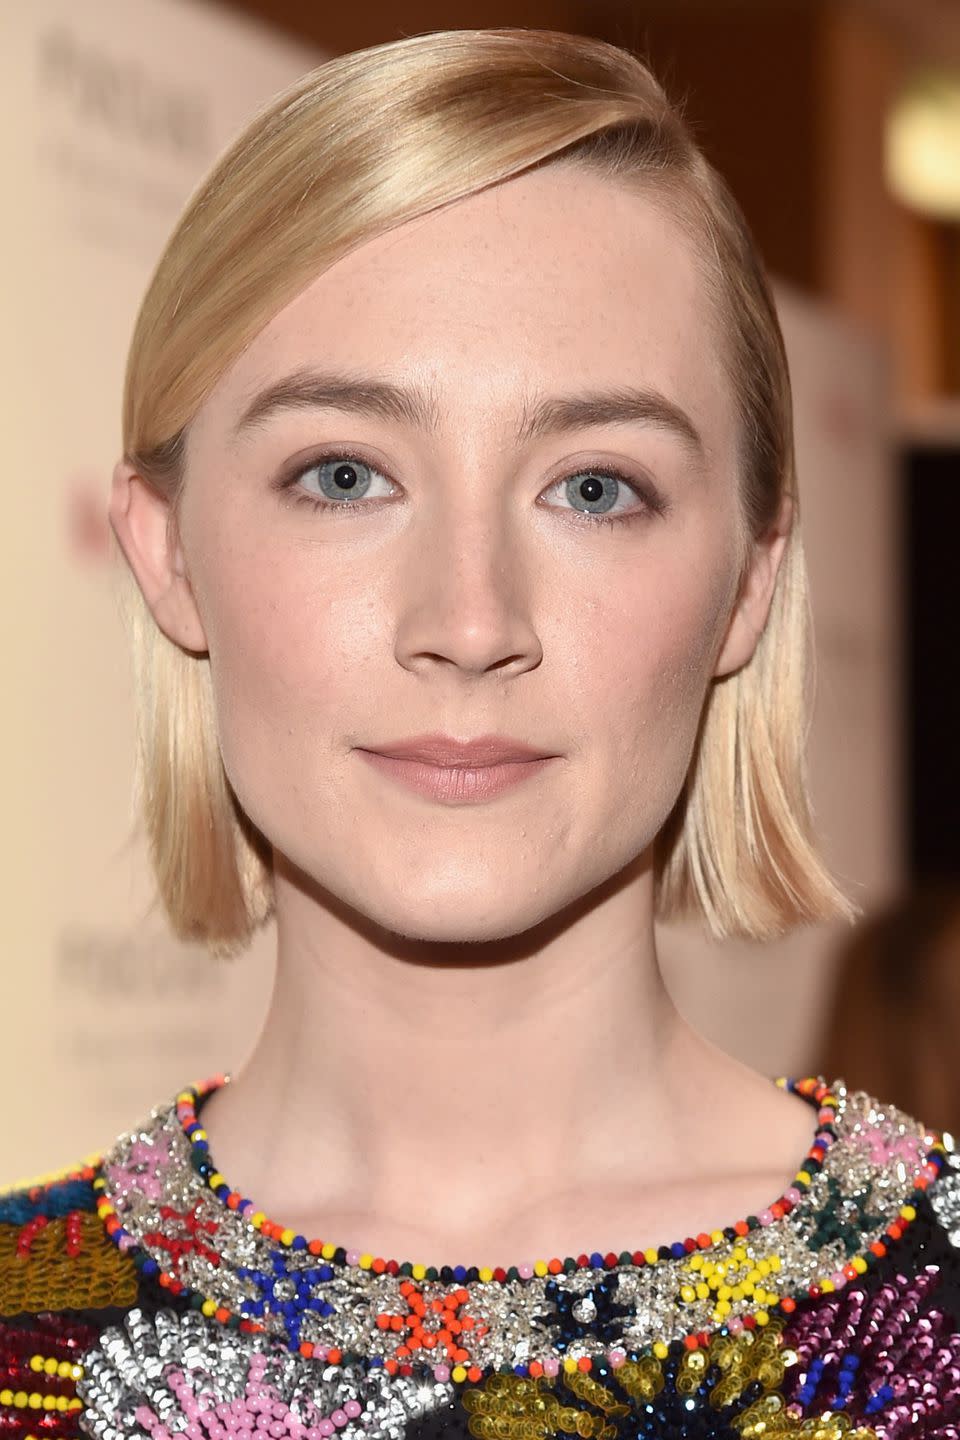 <p>For skin as clear and radiant as Saoirse Ronan's, you need to start with your skincare, specifically a <a rel="nofollow noopener" href="https://www.harpersbazaar.com/beauty/skin-care/a20541/radiant-skin/" target="_blank" data-ylk="slk:vitamin C serum" class="link rapid-noclick-resp">vitamin C serum</a>, such as Skinceuticals' <a rel="nofollow noopener" href="https://www.cowshed.com/uk/skinceuticals-c-e-ferulic-30ml.html?gclid=Cj0KCQjw8YXXBRDXARIsAMzsQuX9J-ZWn19qKhbFFEcOwqUYeG-PZp3_G365W11xhRcD3uPZOeVmxosaAmqqEALw_wcB" target="_blank" data-ylk="slk:C E Ferulic" class="link rapid-noclick-resp">C E Ferulic</a>, £129, to add brightness and fight fine lines. Then, for radiance without shininess, use an illuminating primer, like Hourglass' <a rel="nofollow noopener" href="https://www.googleadservices.com/pagead/aclk?sa=L&ai=DChcSEwjnyoet2tfaAhXVtsAKHWzsBfQYABADGgJpbQ&ohost=www.google.co.uk&cid=CAESEeD2mO05dNWLDI9ud_ATTFpn&sig=AOD64_0F3bSn_nOuj_K5VflpUoimC4GUHA&ctype=5&q=&ved=0ahUKEwiH24Ct2tfaAhWhm-AKHdtKBQEQ9aACCEA&adurl=" target="_blank" data-ylk="slk:Ambient Light Correcting Primer" class="link rapid-noclick-resp">Ambient Light Correcting Primer</a>, £36, before your foundation, and a light-reflecting powder, like Guerlain's <a rel="nofollow noopener" href="https://www.feelunique.com/p/GUERLAIN-Meteorites-Blossom-Collection-Meteorites-Pearls-25g?option=16781&gclid=Cj0KCQjw8YXXBRDXARIsAMzsQuX3jugUBGTM-Dc-8dxy1BbYEfM8iSe-w5YFzU79Uvh7O5uG1q8K_9QaAoYEEALw_wcB&gclsrc=aw.ds" target="_blank" data-ylk="slk:Météorites Pearls" class="link rapid-noclick-resp">Météorites Pearls</a>, £42, that contains a hint of blush, afterwards.</p>